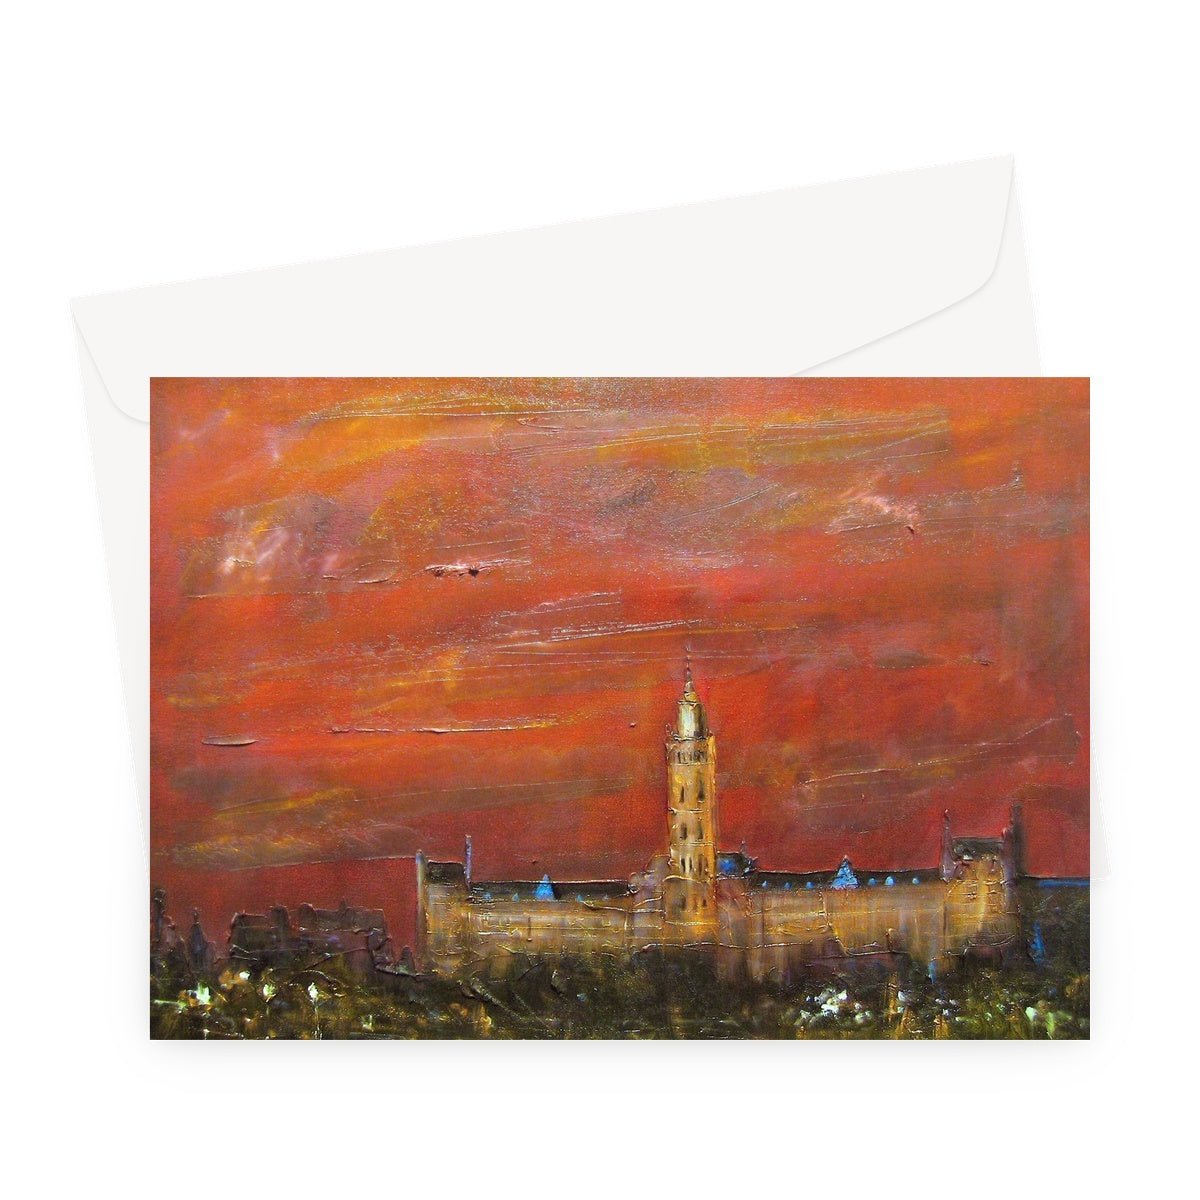 Glasgow University Dusk Art Gifts Greeting Card-Greetings Cards-Edinburgh & Glasgow Art Gallery-A5 Landscape-10 Cards-Paintings, Prints, Homeware, Art Gifts From Scotland By Scottish Artist Kevin Hunter